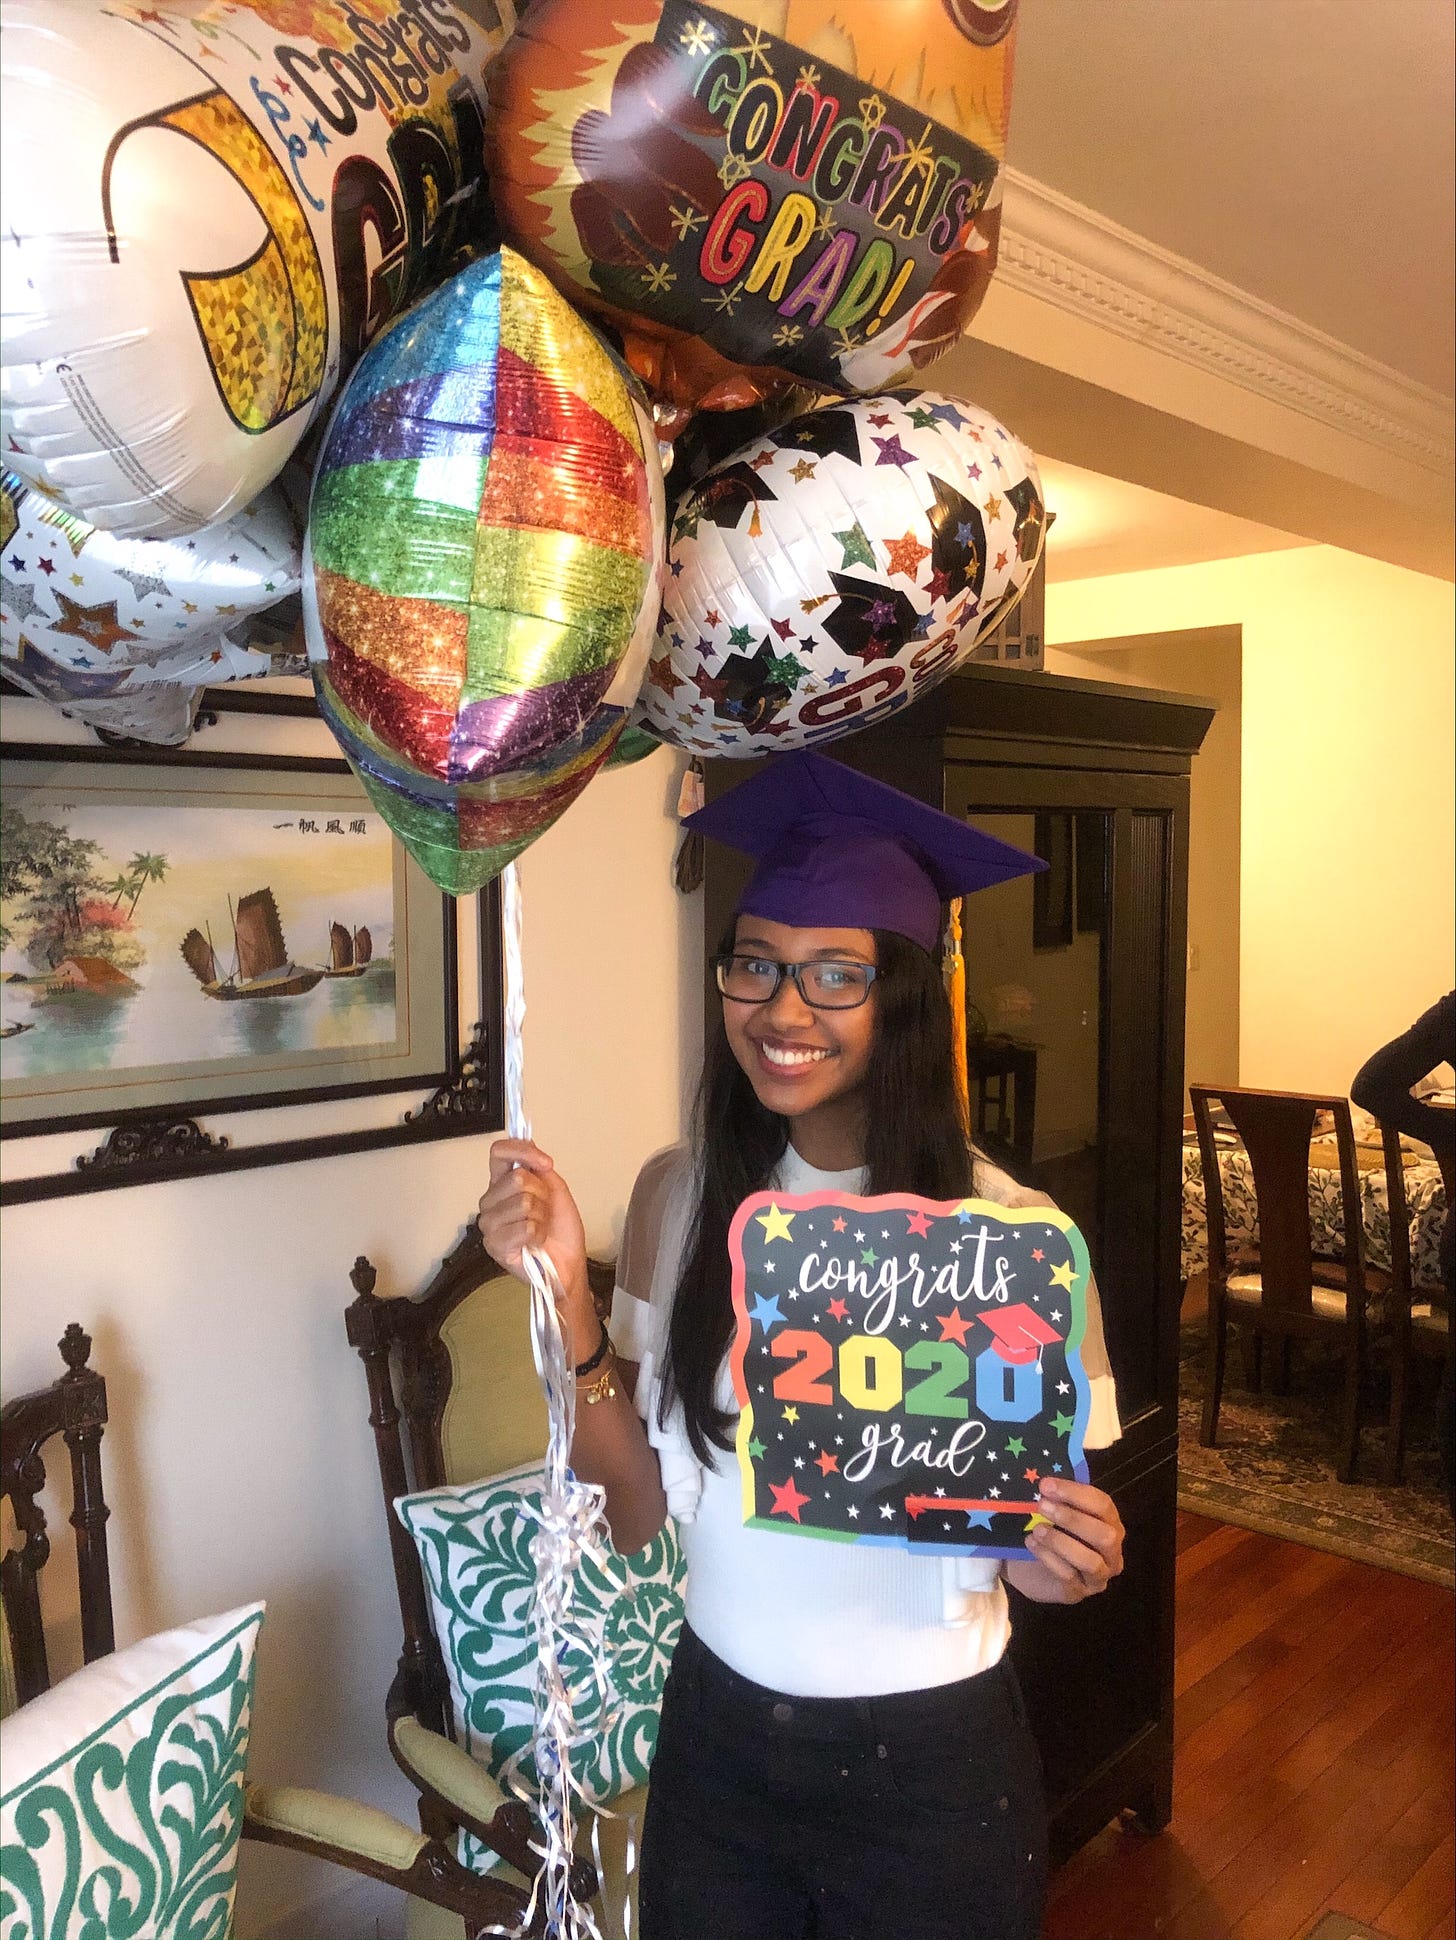 Melissa, standing in her living room with a purple grad cap on. She's holding grad balloons and a sign that says, "Congrats 2020 grad."